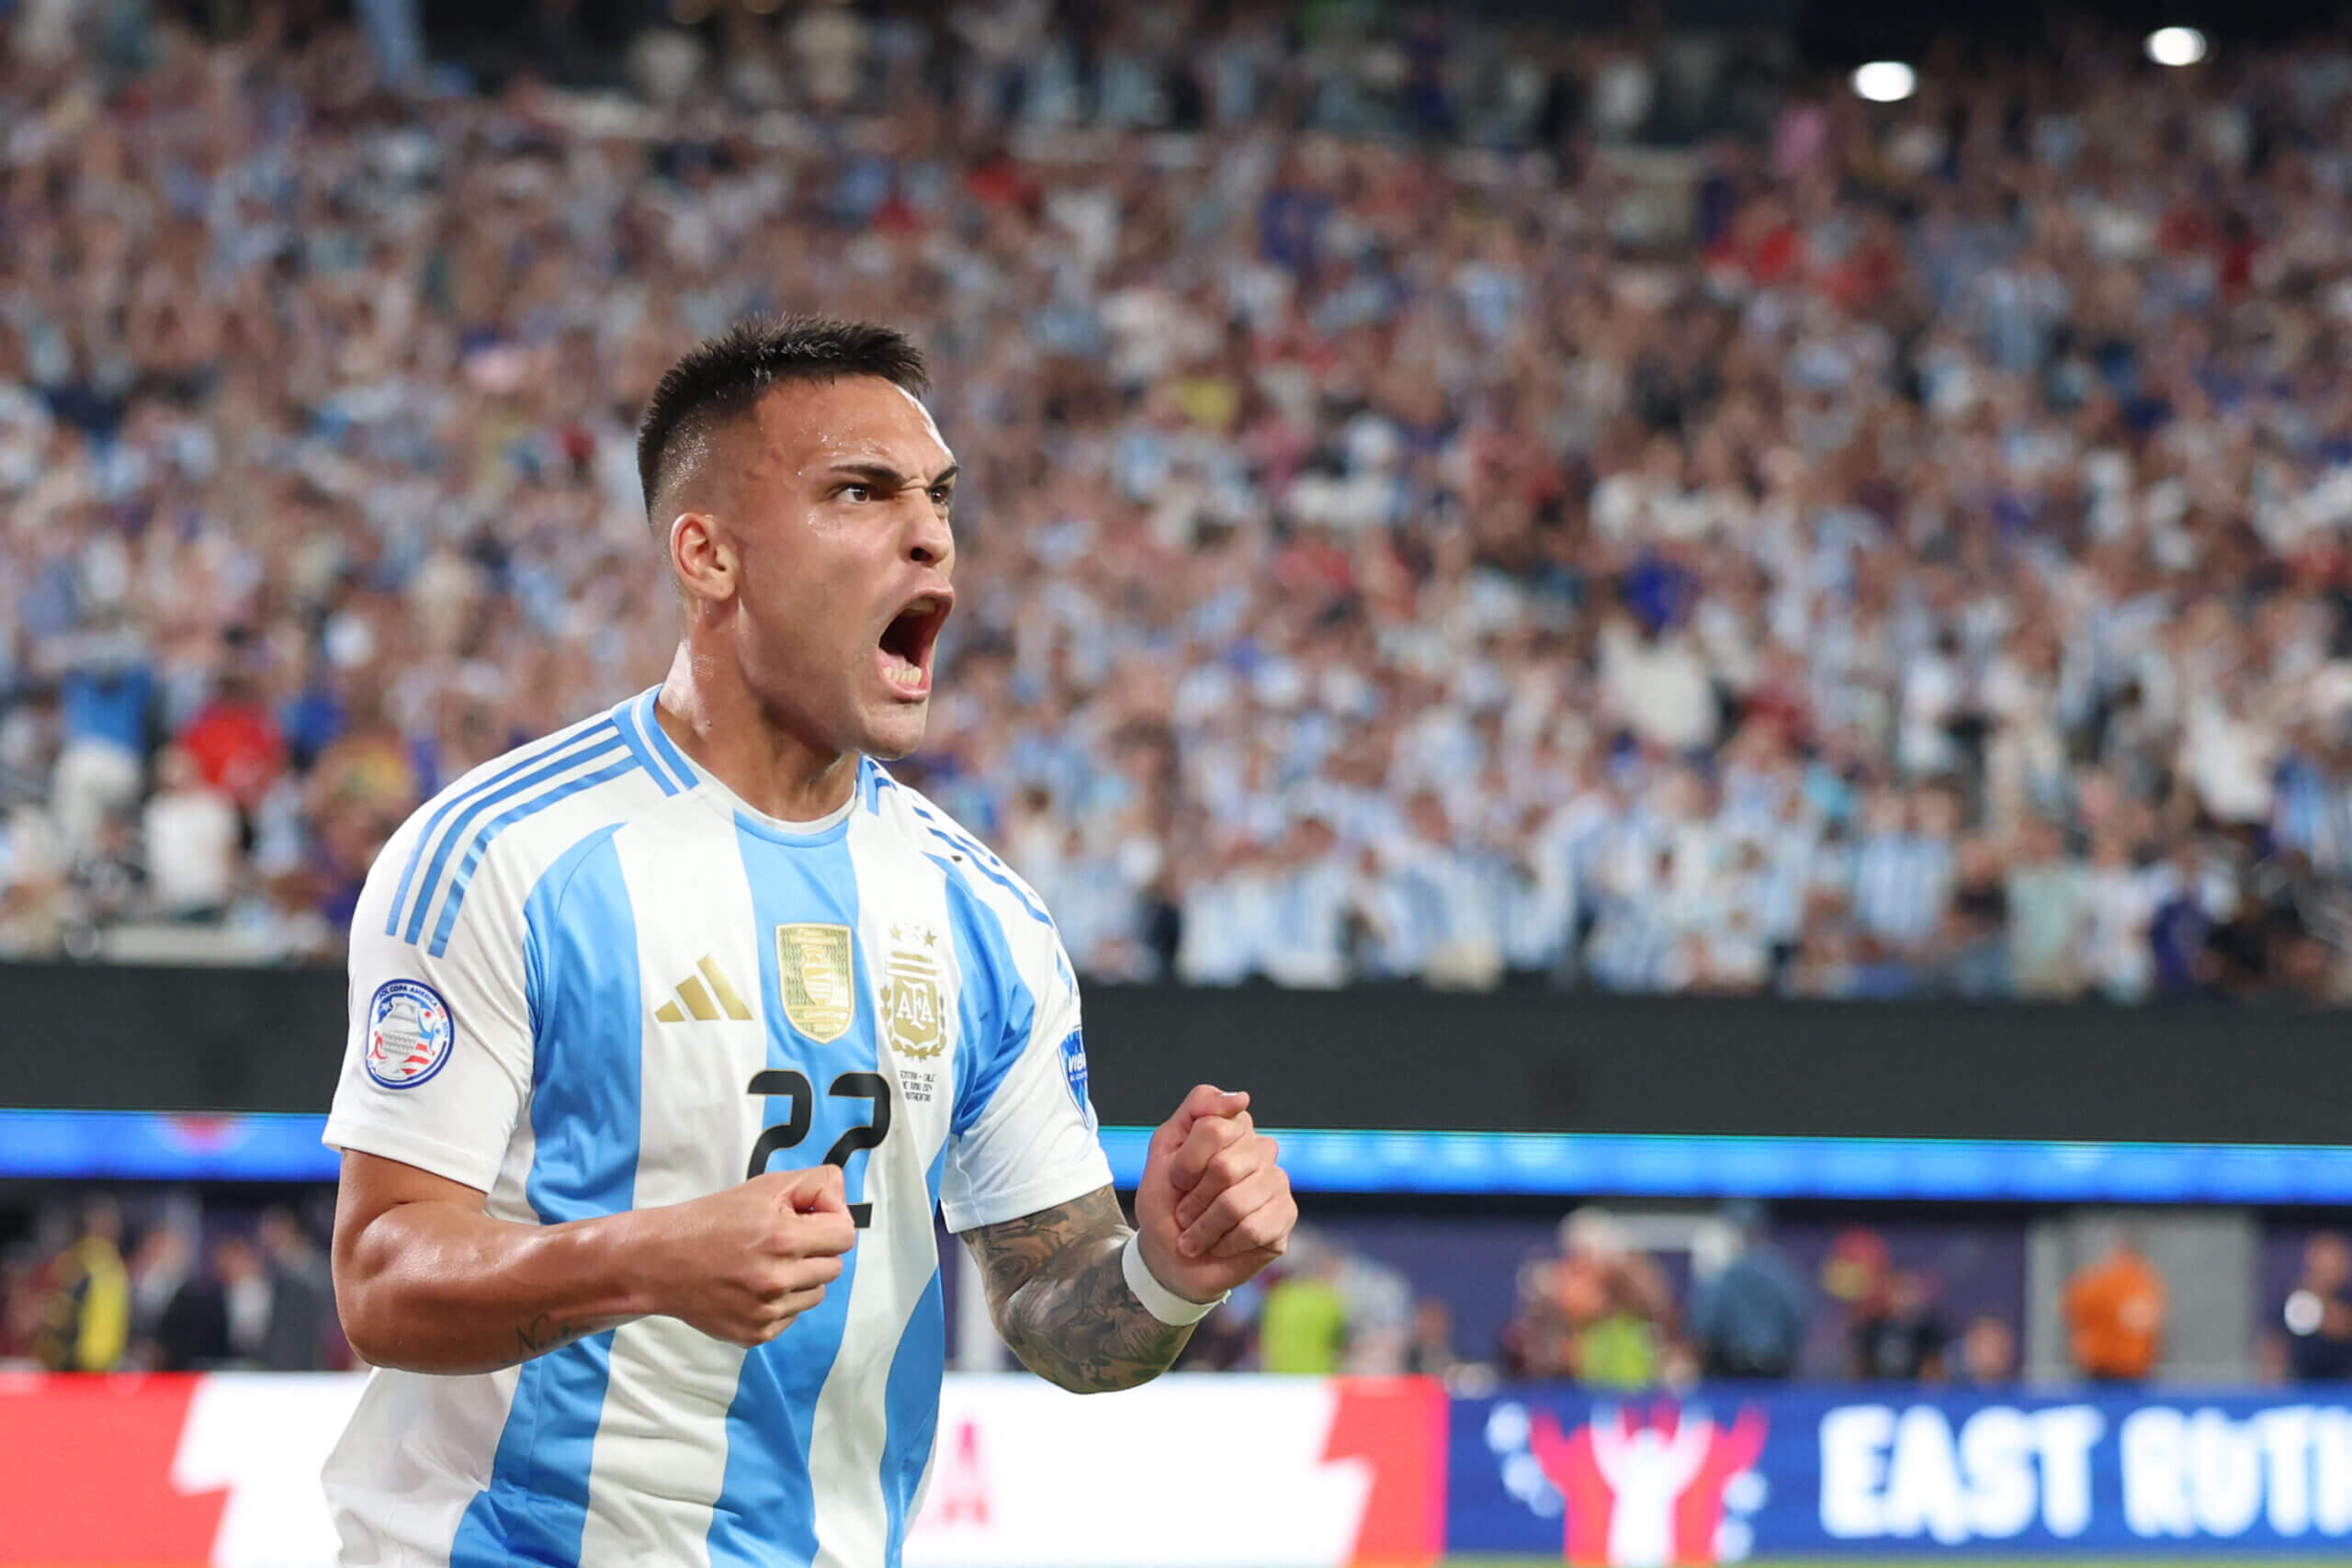 Argentina's rabid fans turned Times Square blue and white – and their team fought